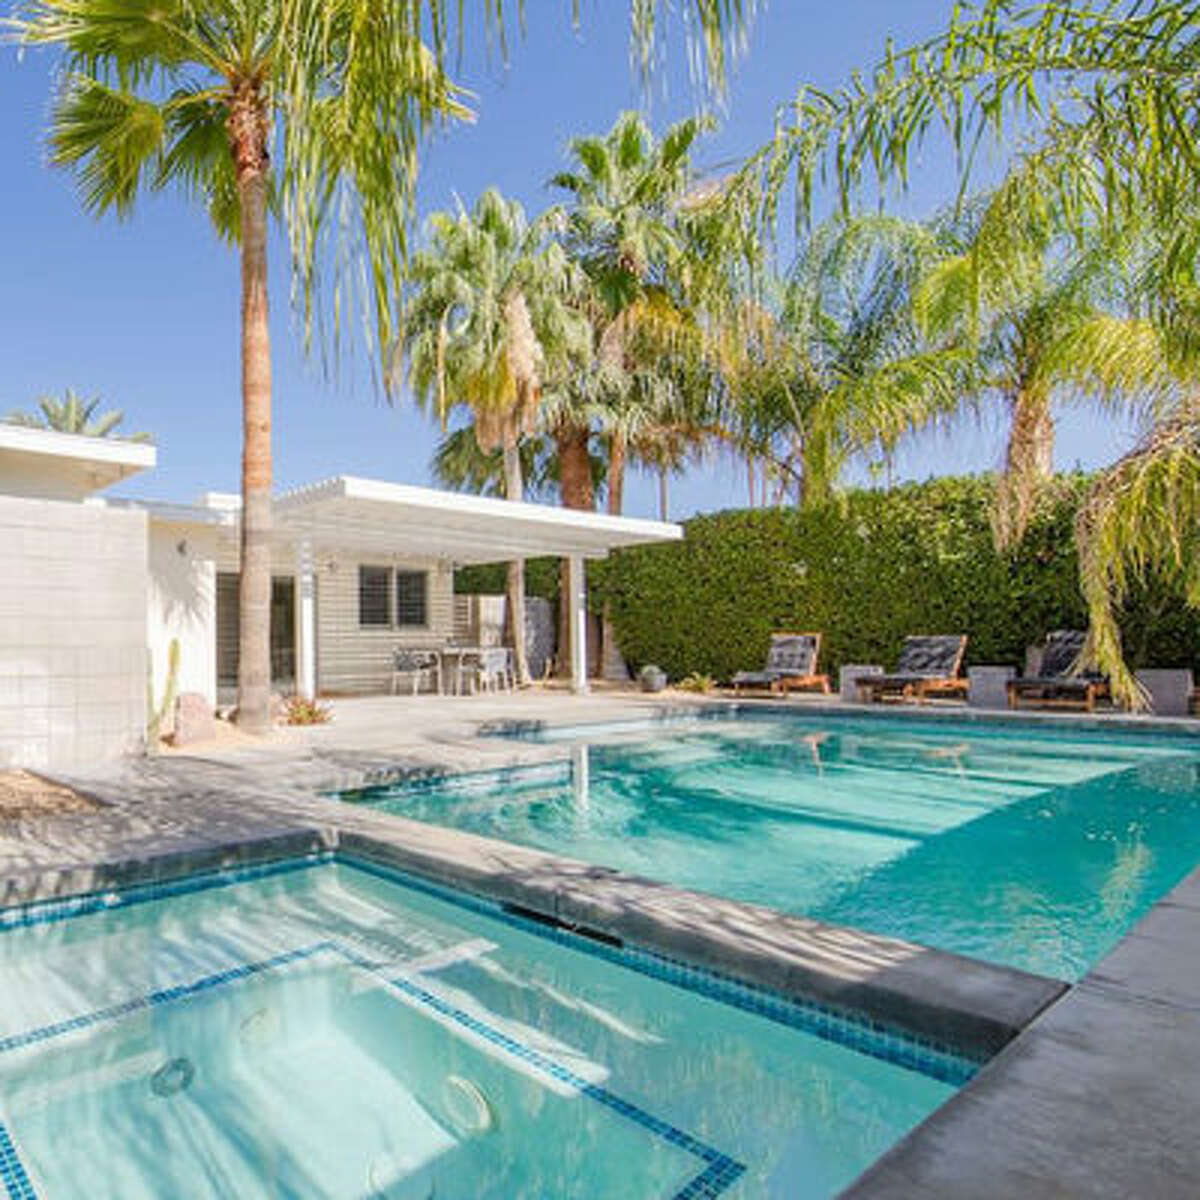 Instead of heading off to big resorts or amusement parks or national parks, we will book Airbnbs or VRBOs or other short term rentals with big yards and backyard pools like this Palm Springs beauty.